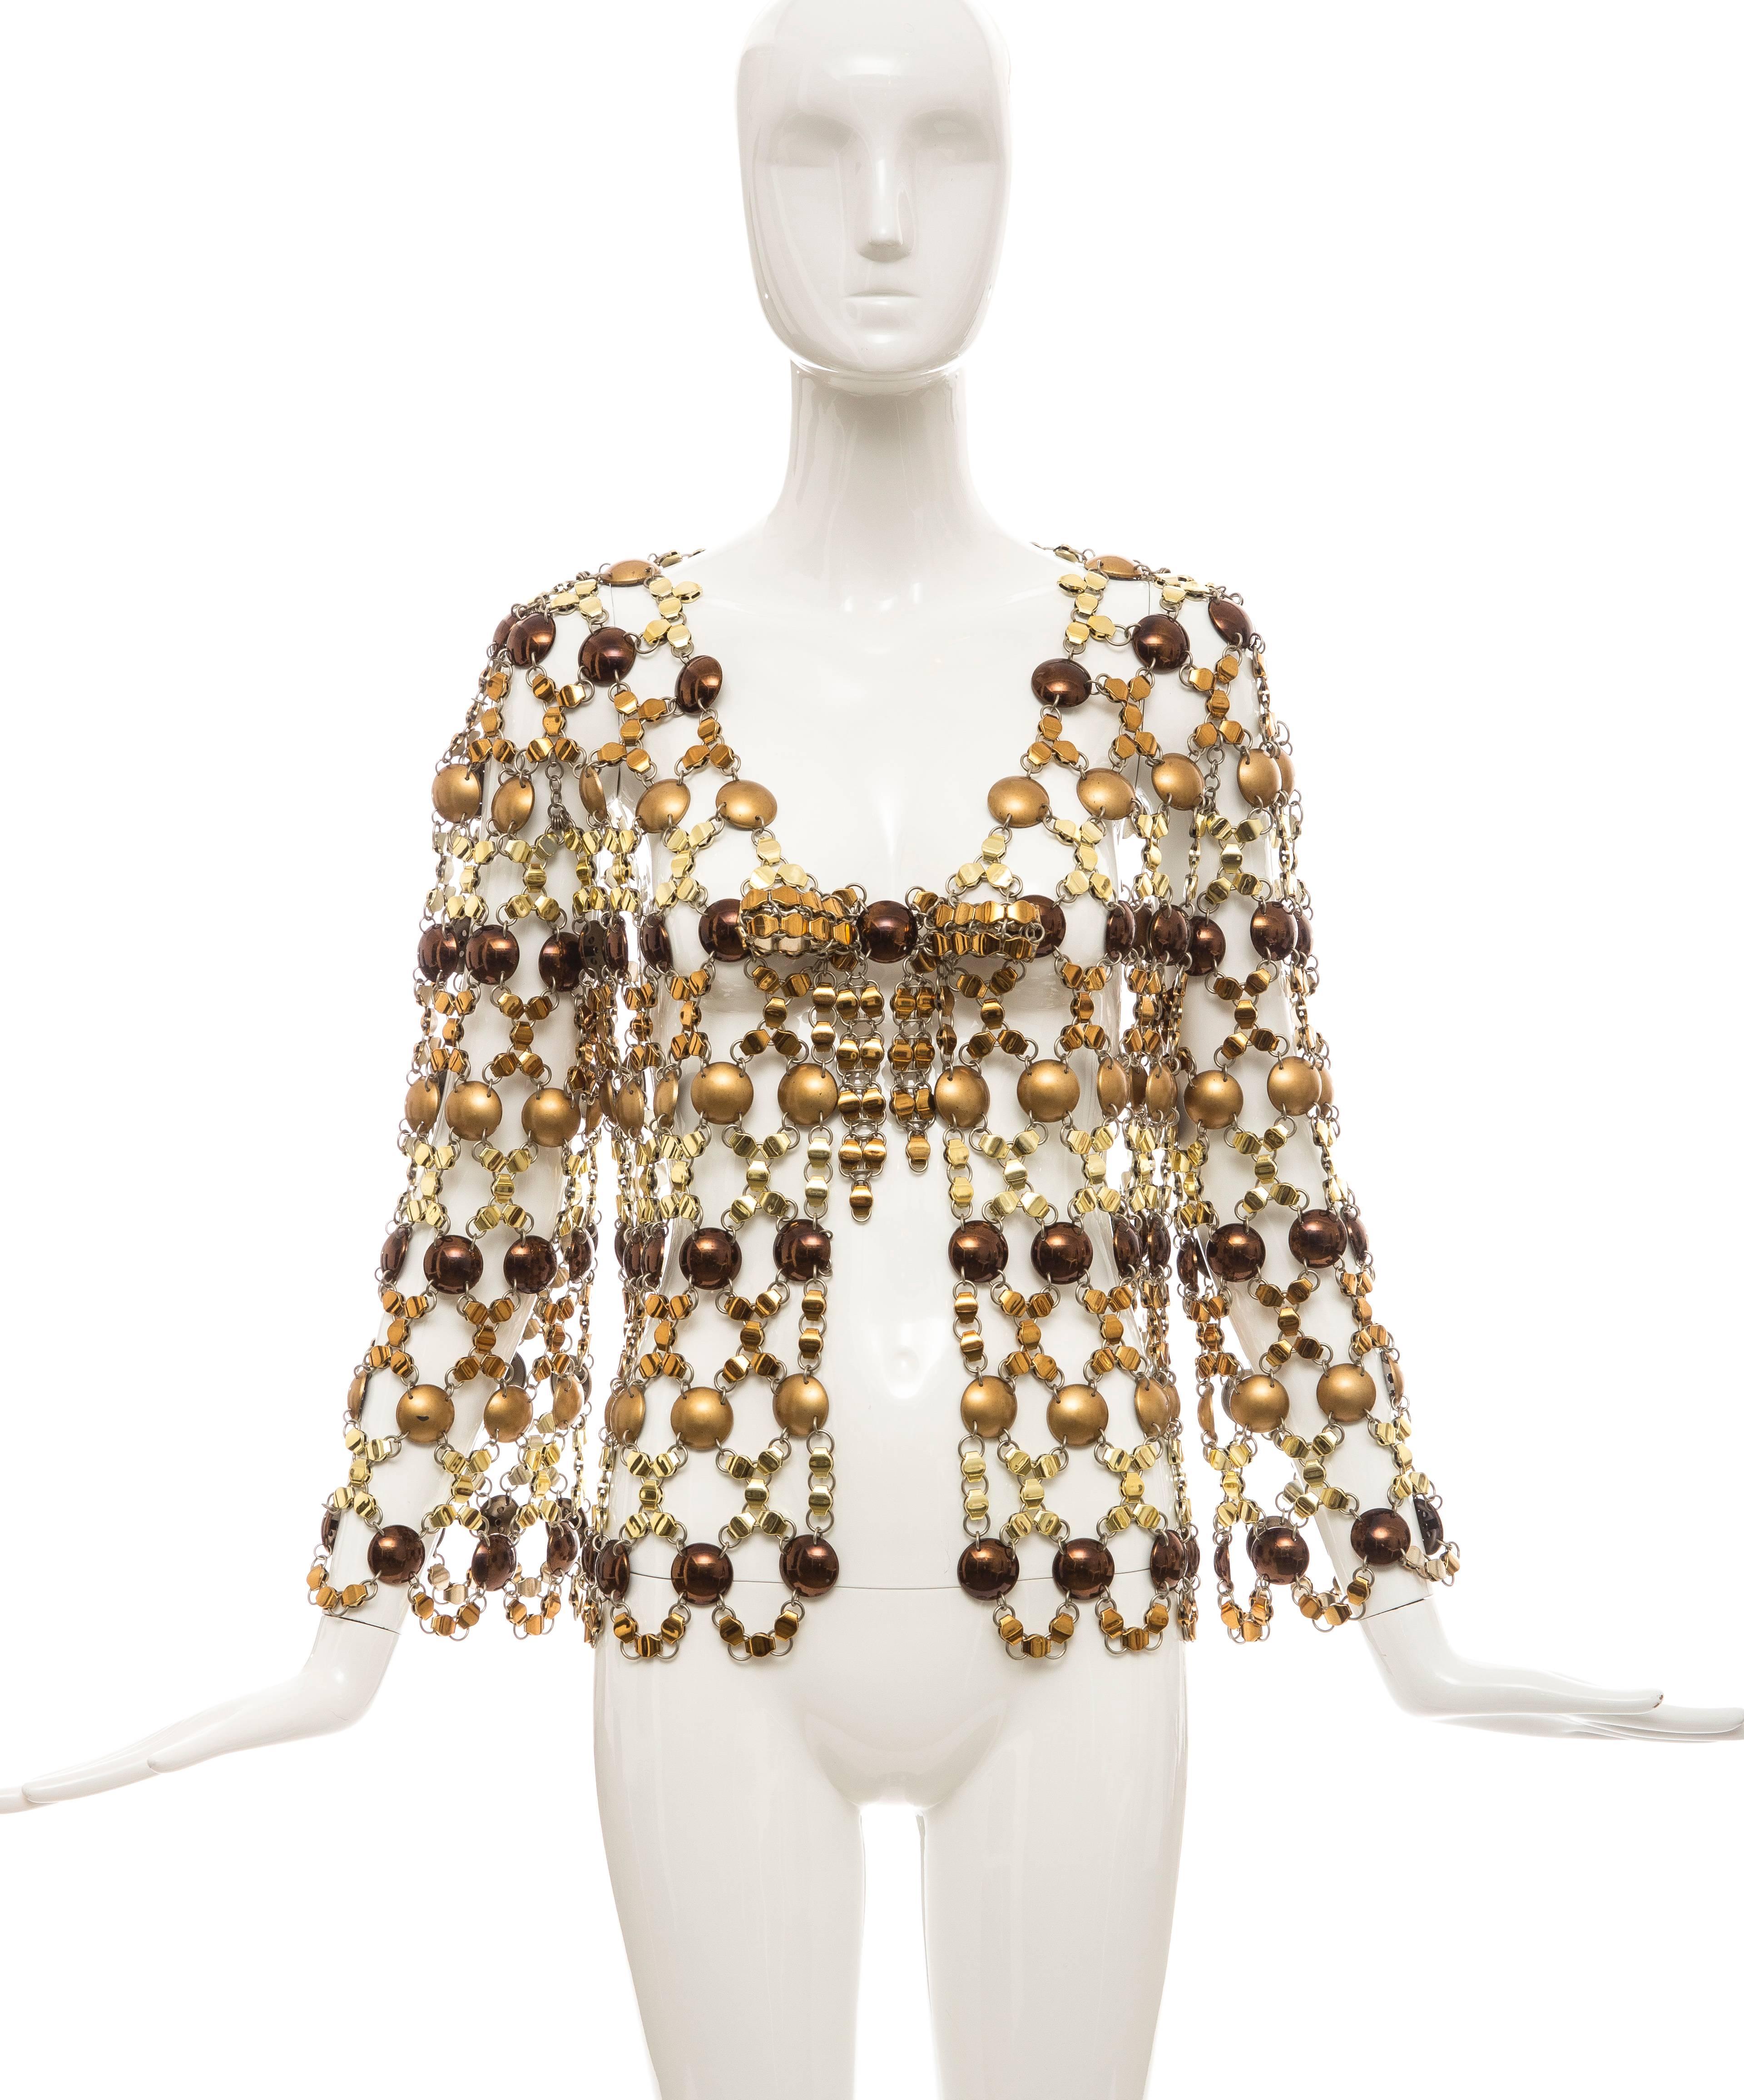 Paco Rabanne, circa 1970's, chain mail top consisting of bronze and copper plastic circular disks with bronze and gold metal links and numbered fabric tag.

Shoulder: 17, Bust: 36, Length: 16, Waist: 36